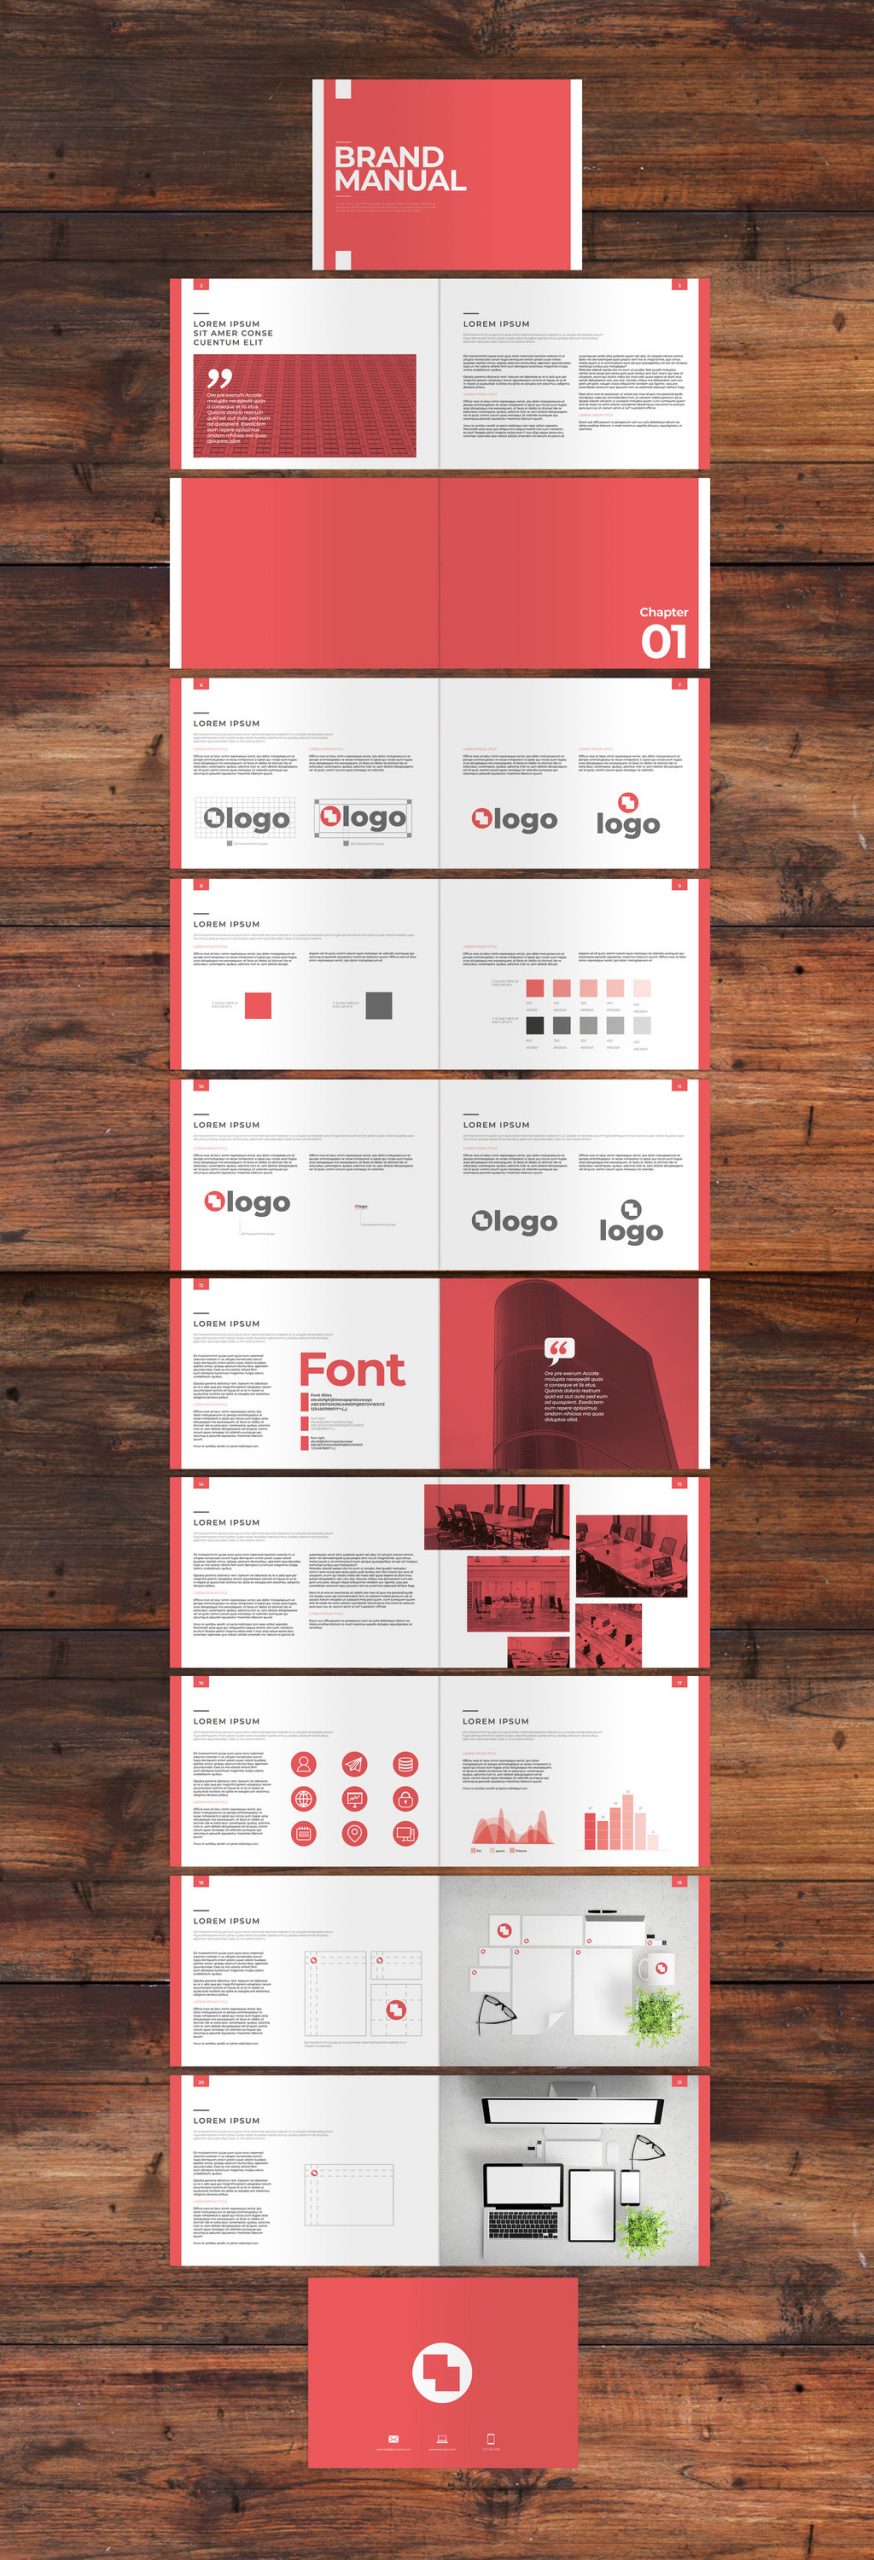 Red and White Brand Manual Layout by McLittle Stock